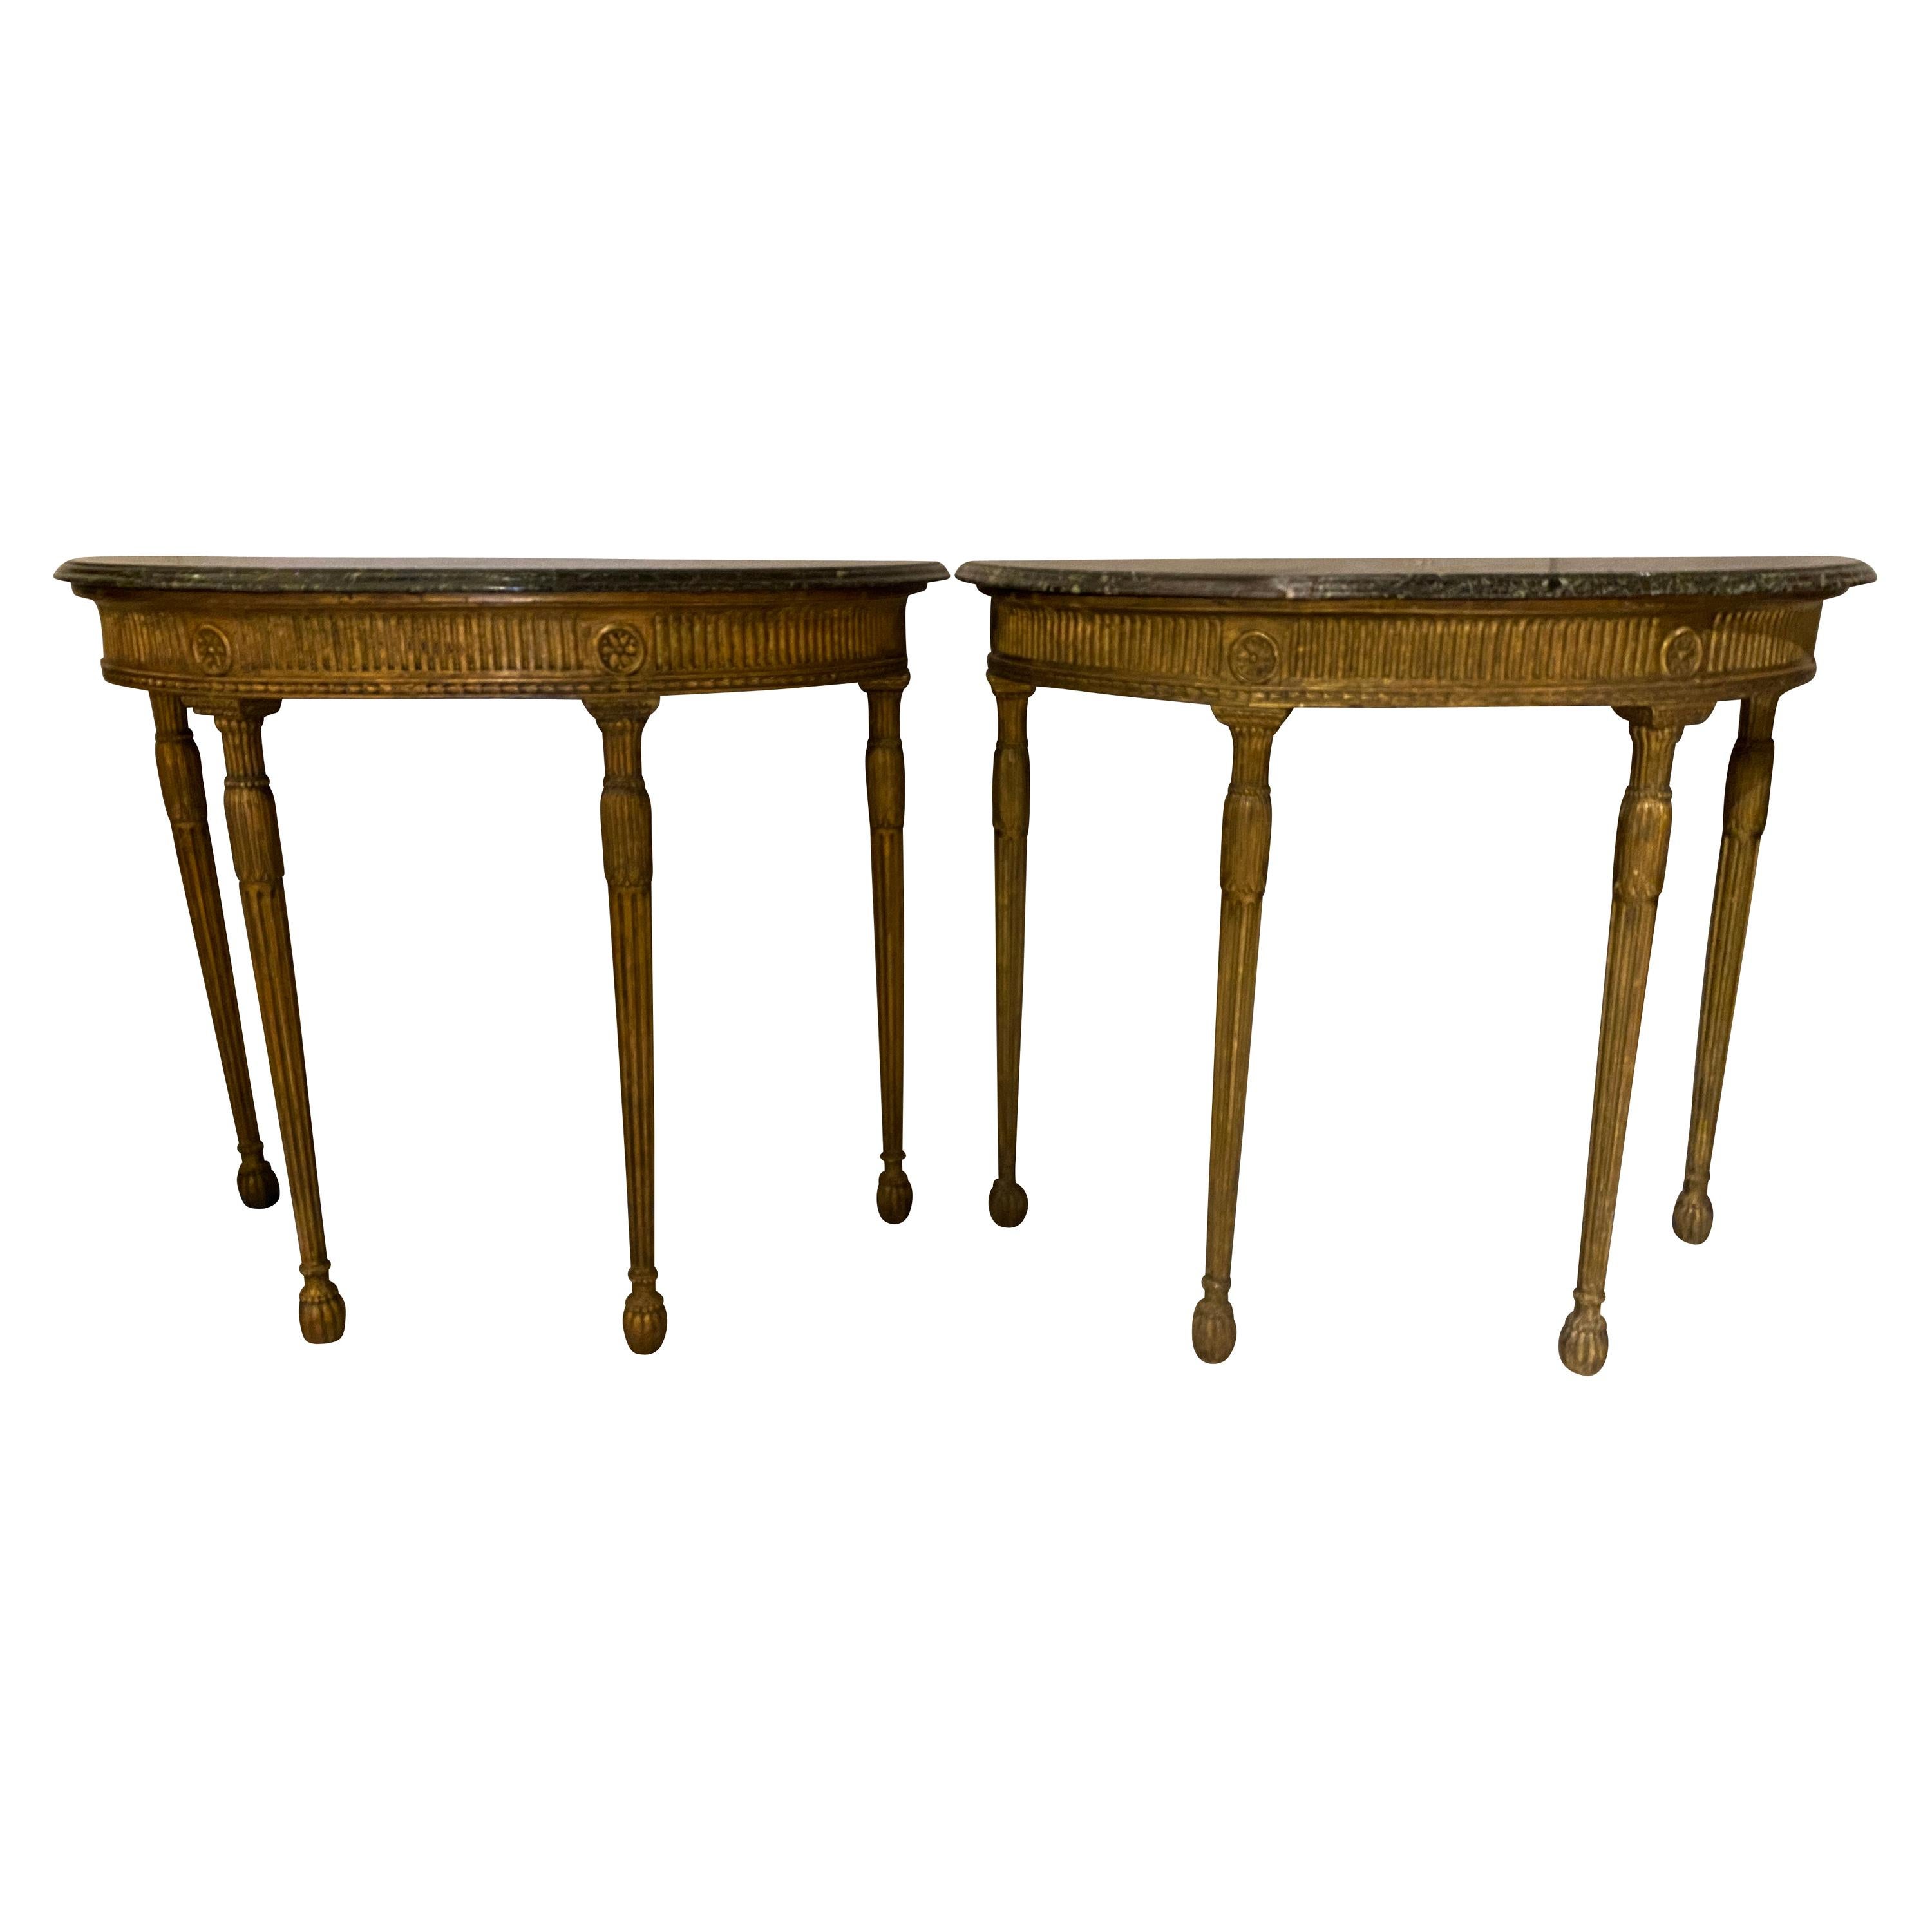 Pair of George III Giltwood Demilune Console Tables